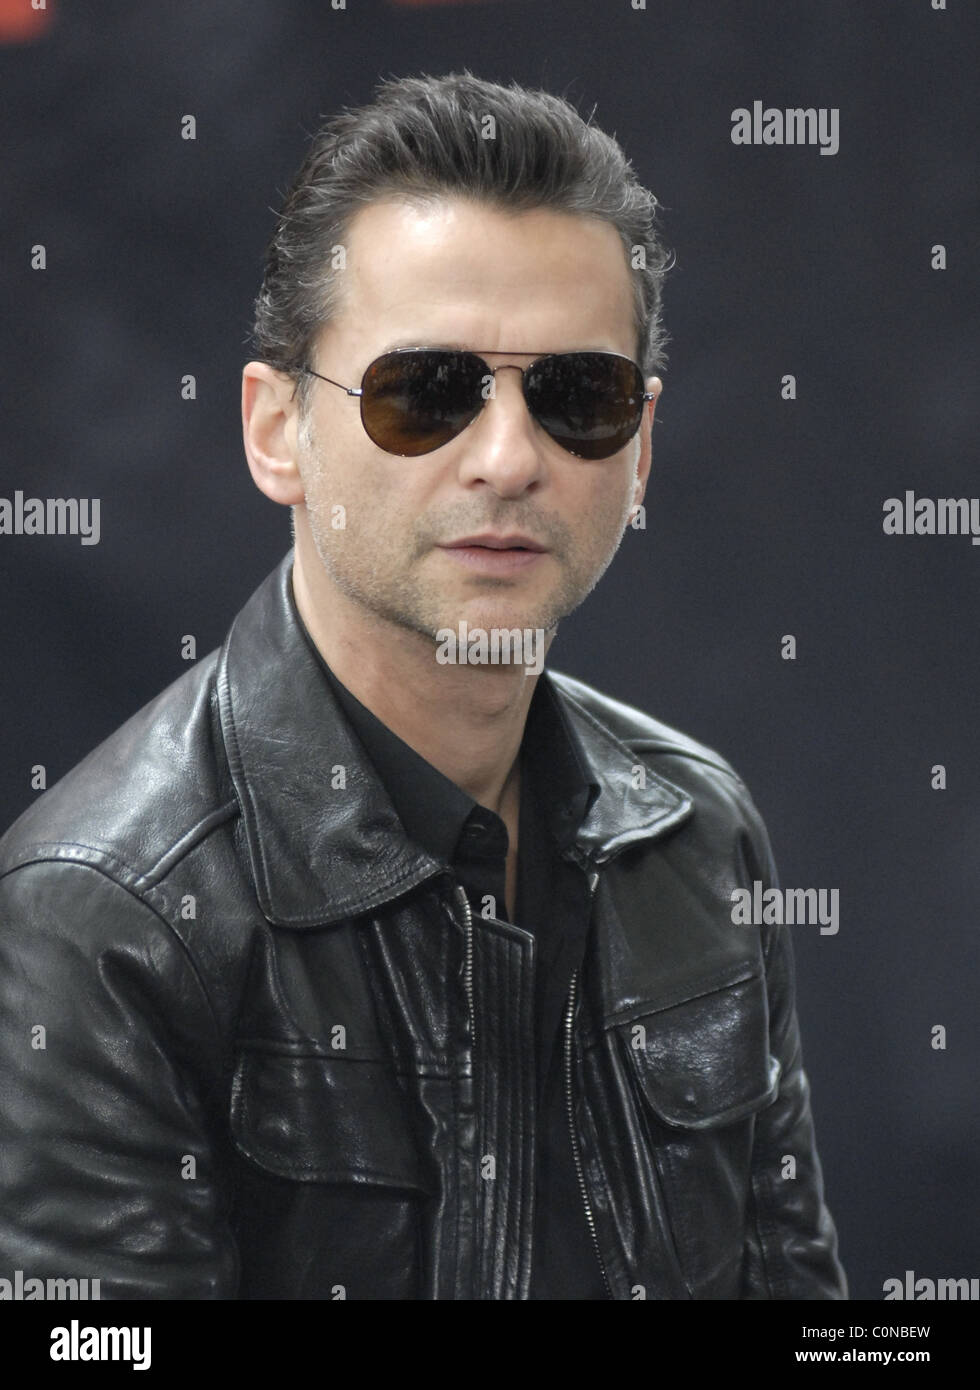 Dave Gahan 🎤 - Then and Now - His Life In Pictures 📷 